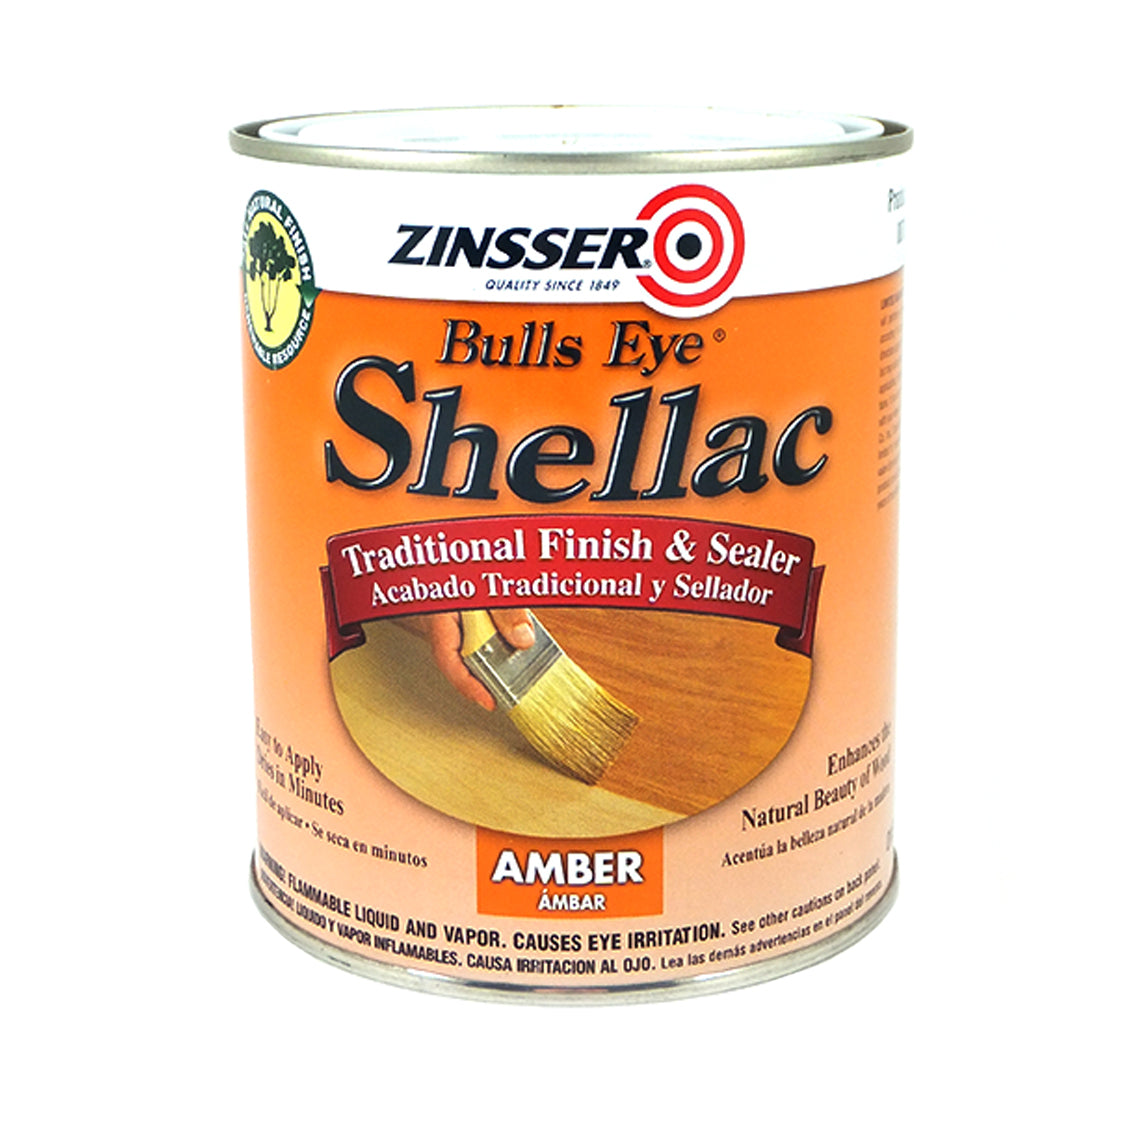 A Short History of How Shellac Became Known as a Sealer